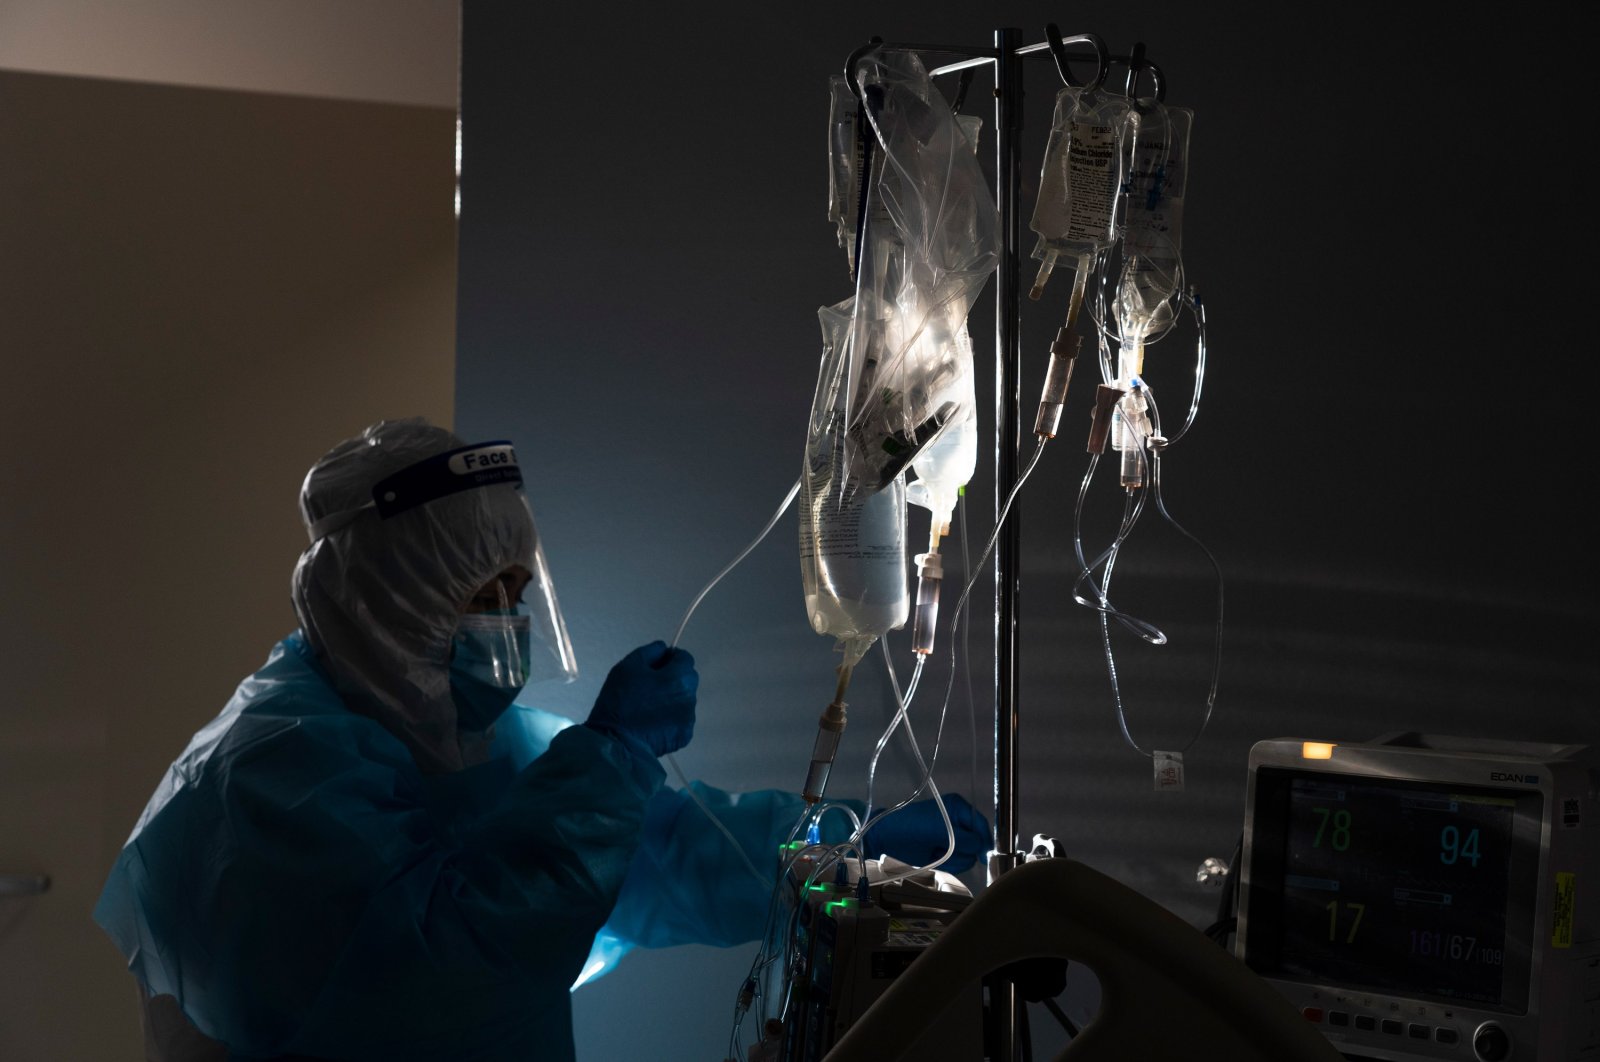 A medical staff member treats a patient suffering from the coronavirus disease in the COVID-19 intensive care unit (ICU) at the United Memorial Medical Center, Houston, Texas, Nov. 14, 2020. (Getty Images)